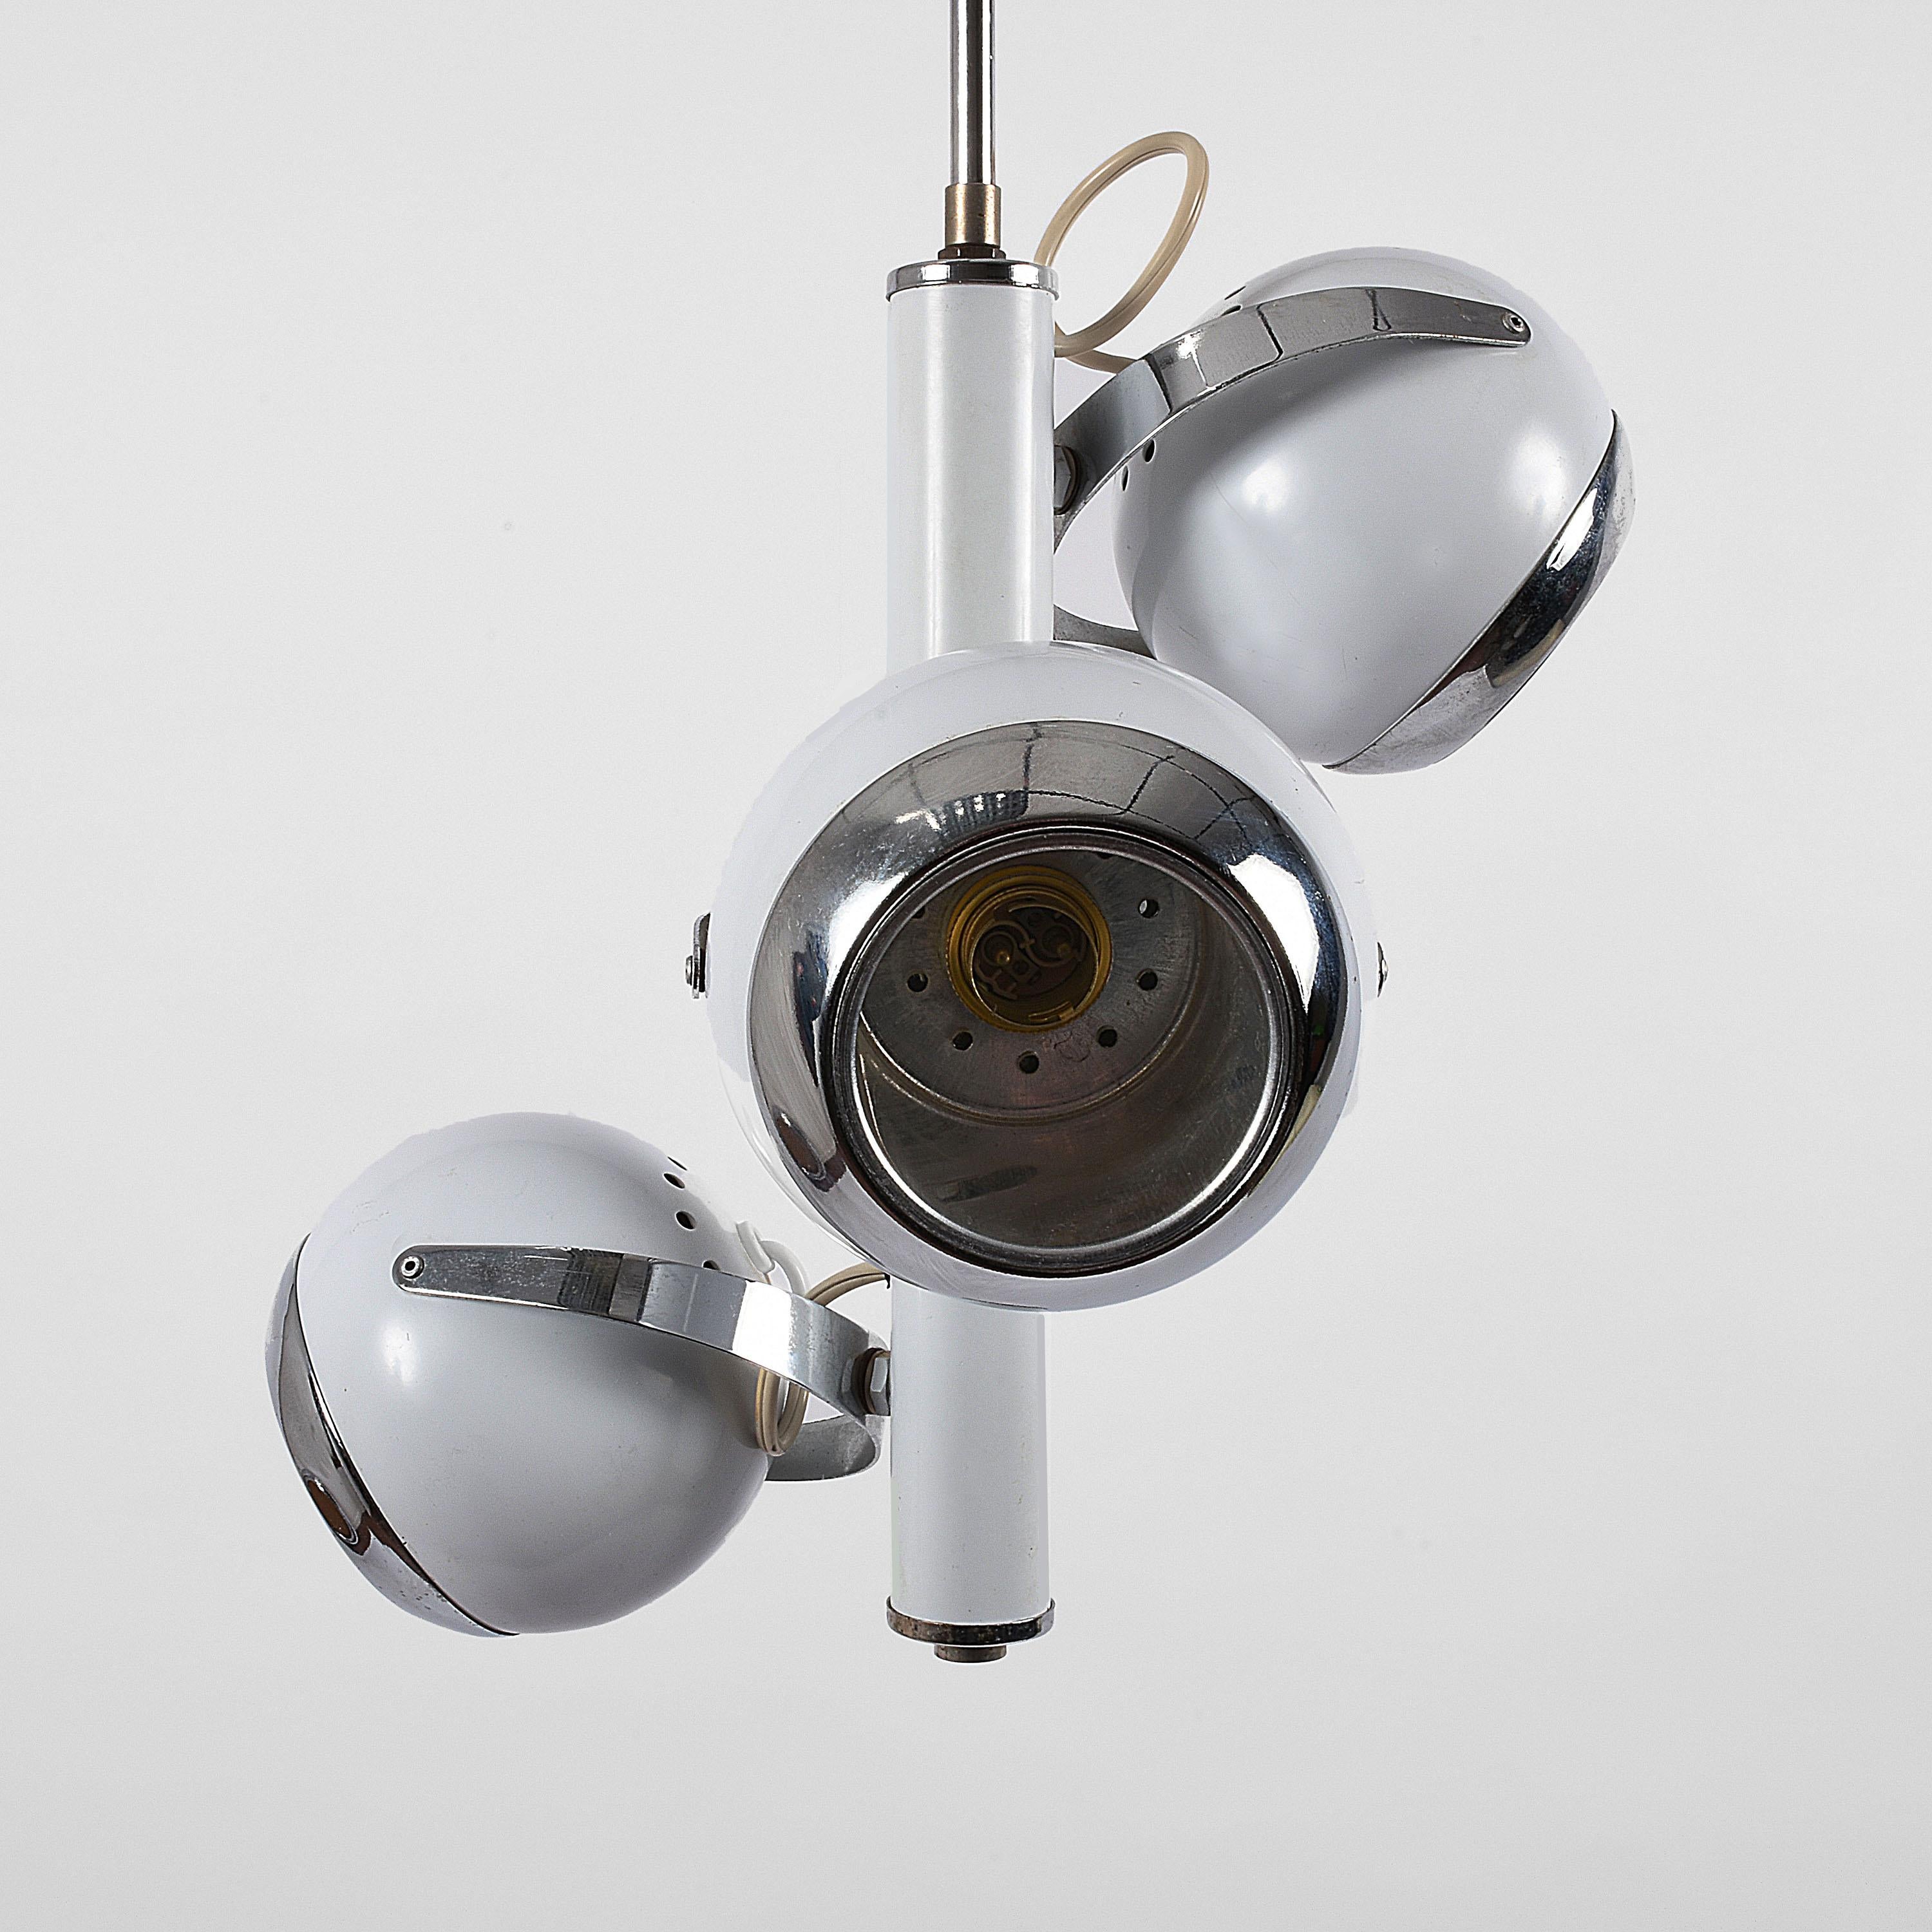 Mid-Century Modern Guzzini Chandelier with Three Adjustable Lights White and Chrome, Italy, 1970s For Sale